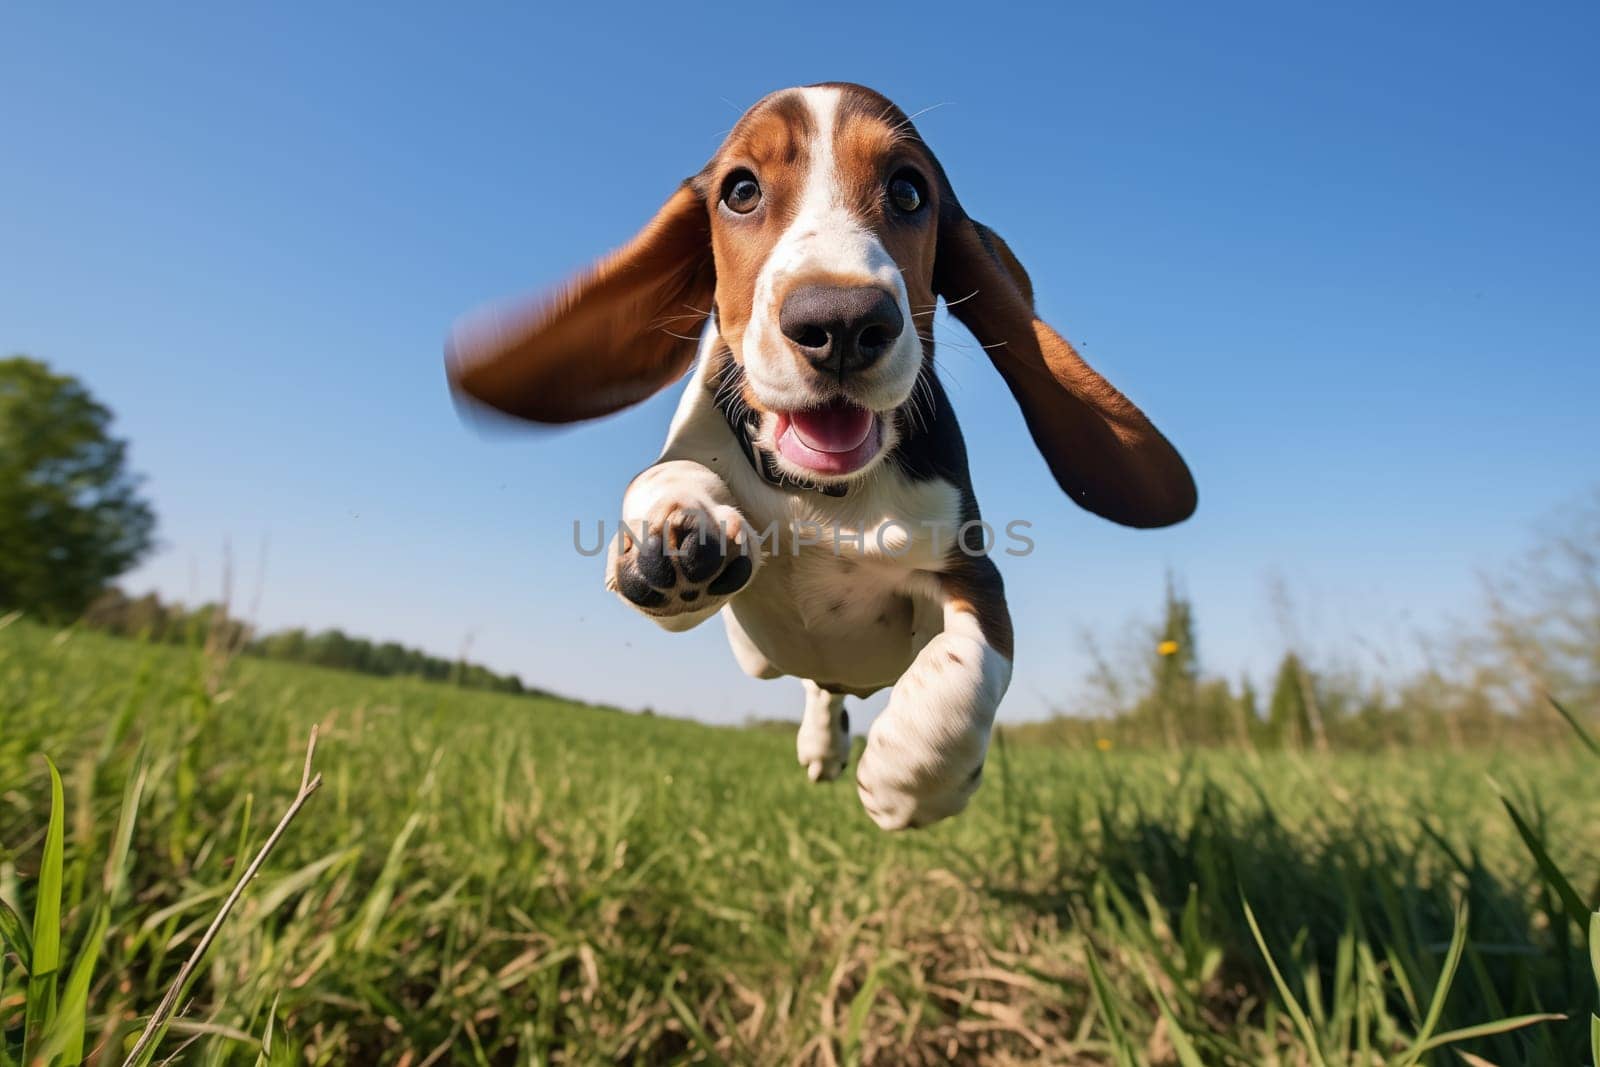 A close-up shot of a playful Basset Hound puppy with floppy ears, running, jumping, and exploring the outdoors